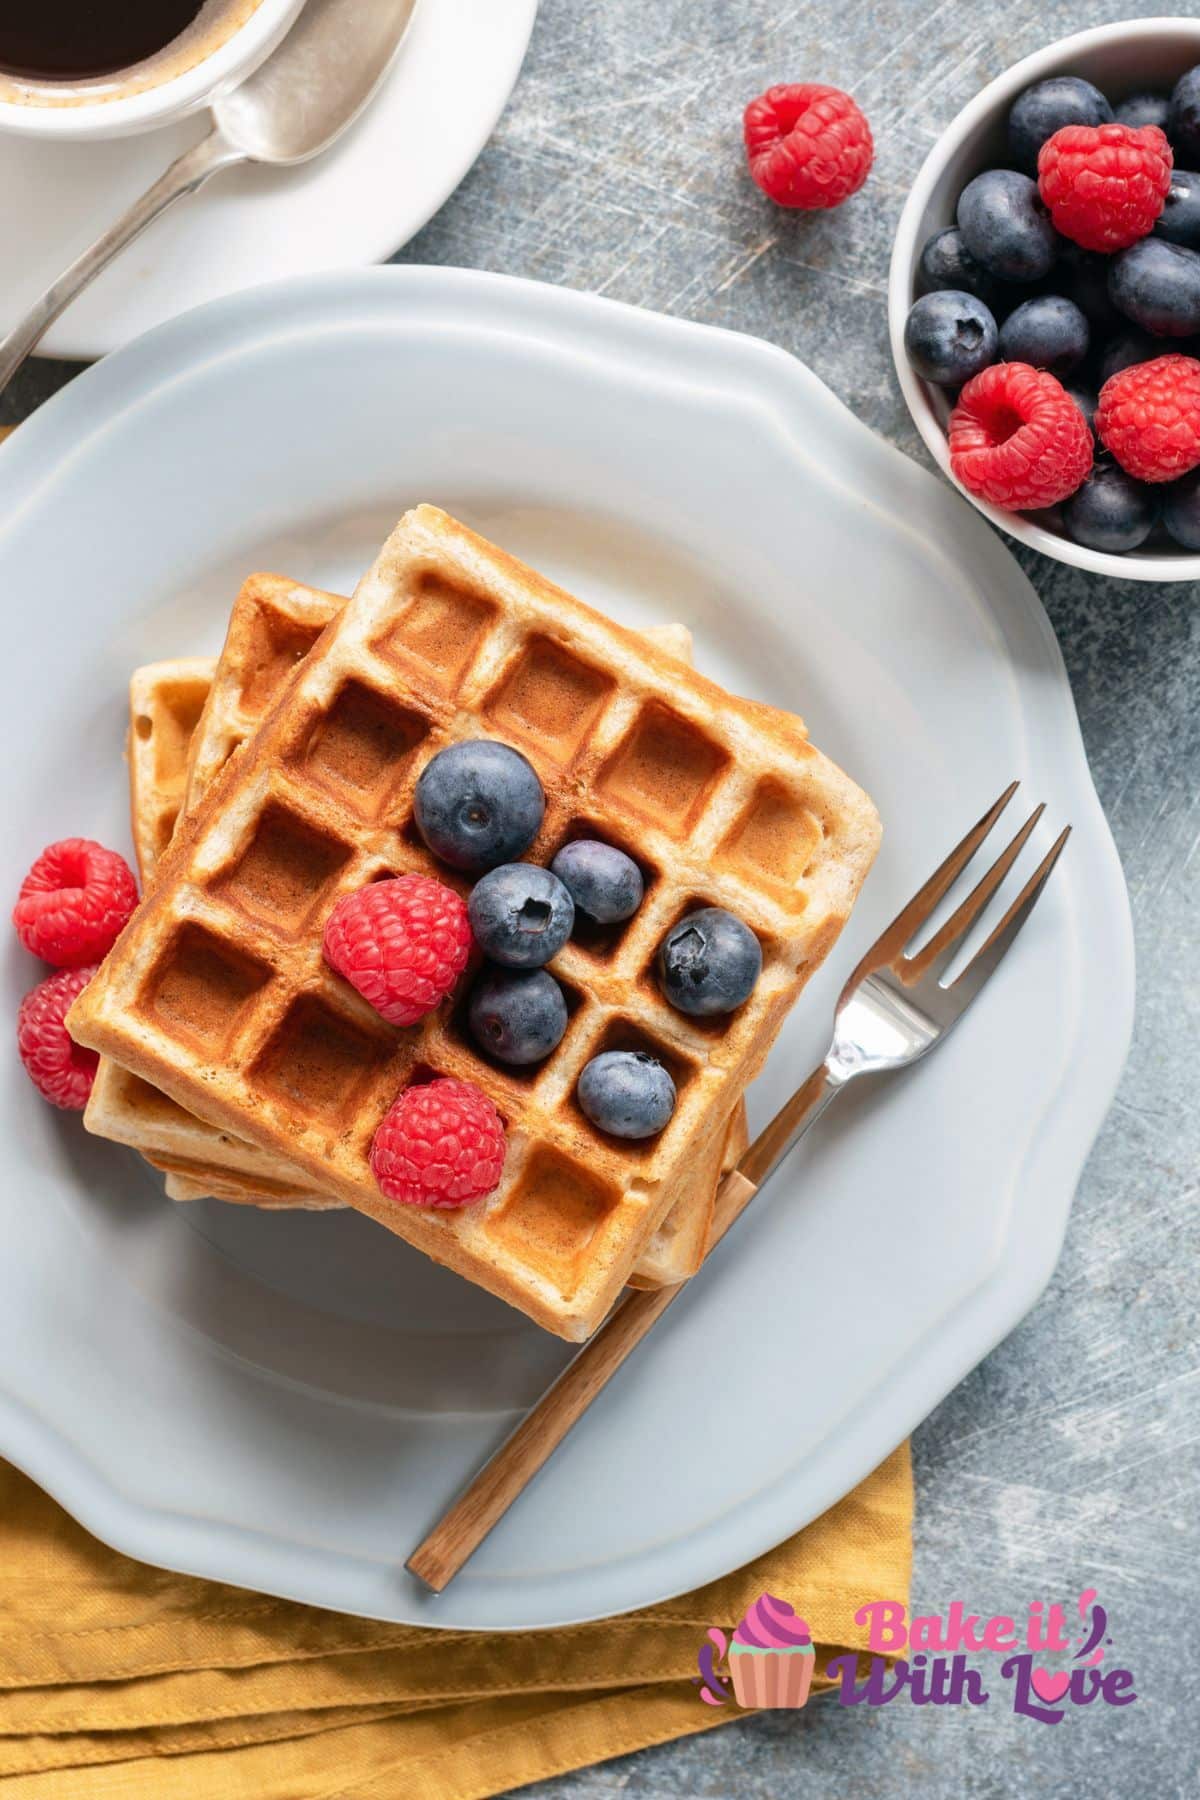 Tall image showing waffles with fruit and syrup.